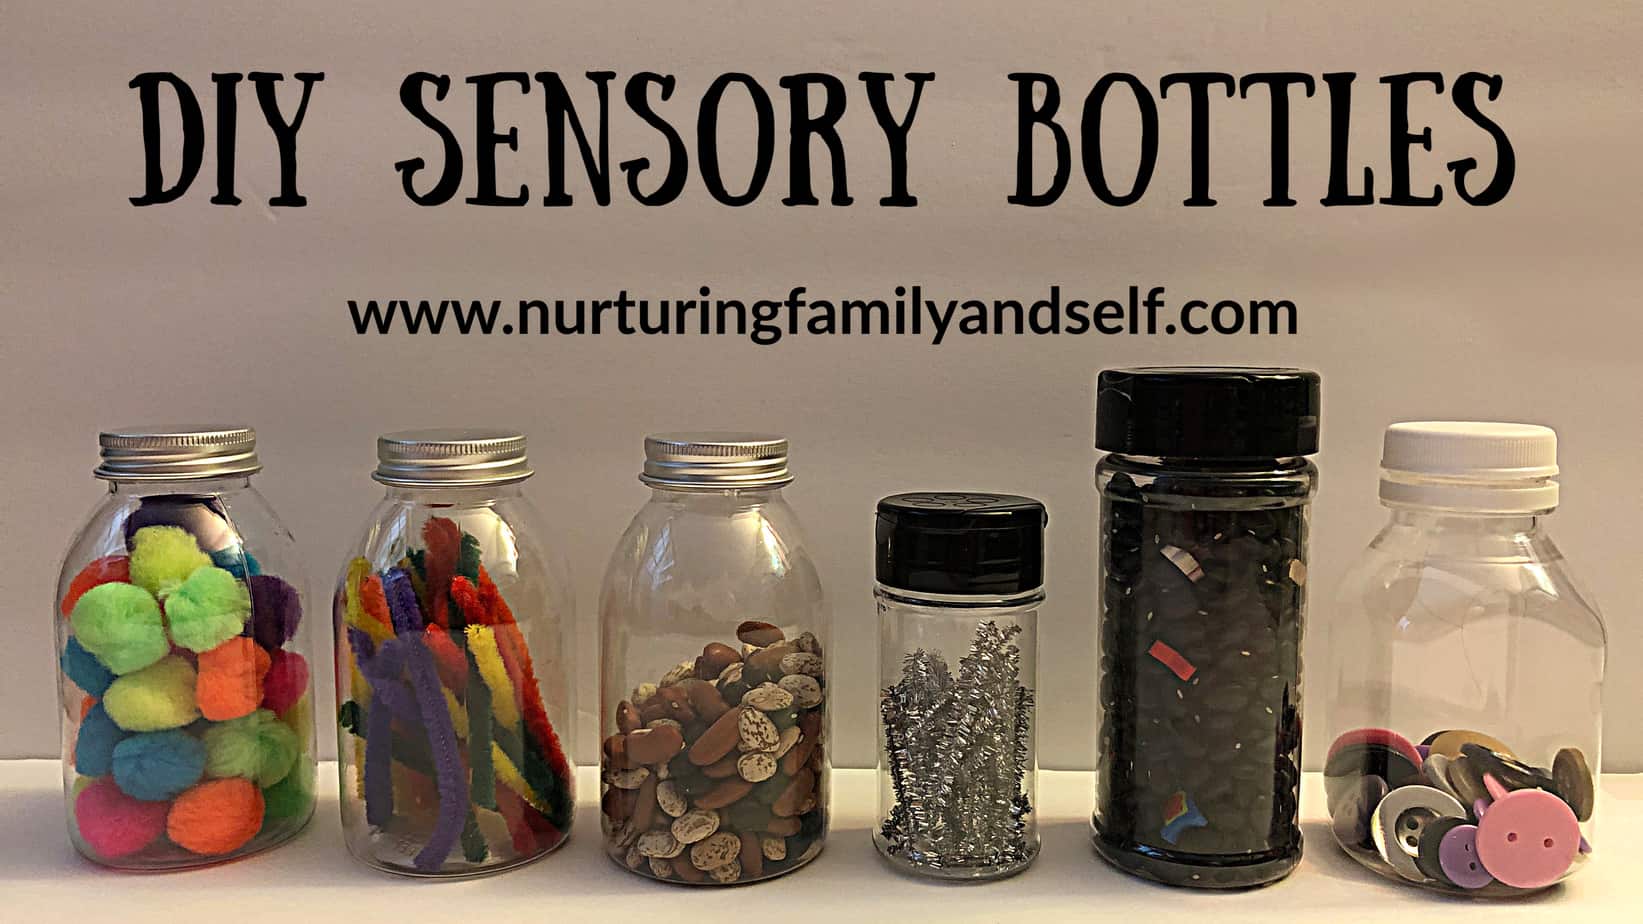 Simple Bottle Shaker Sensory Activity for Babies & Toddlers